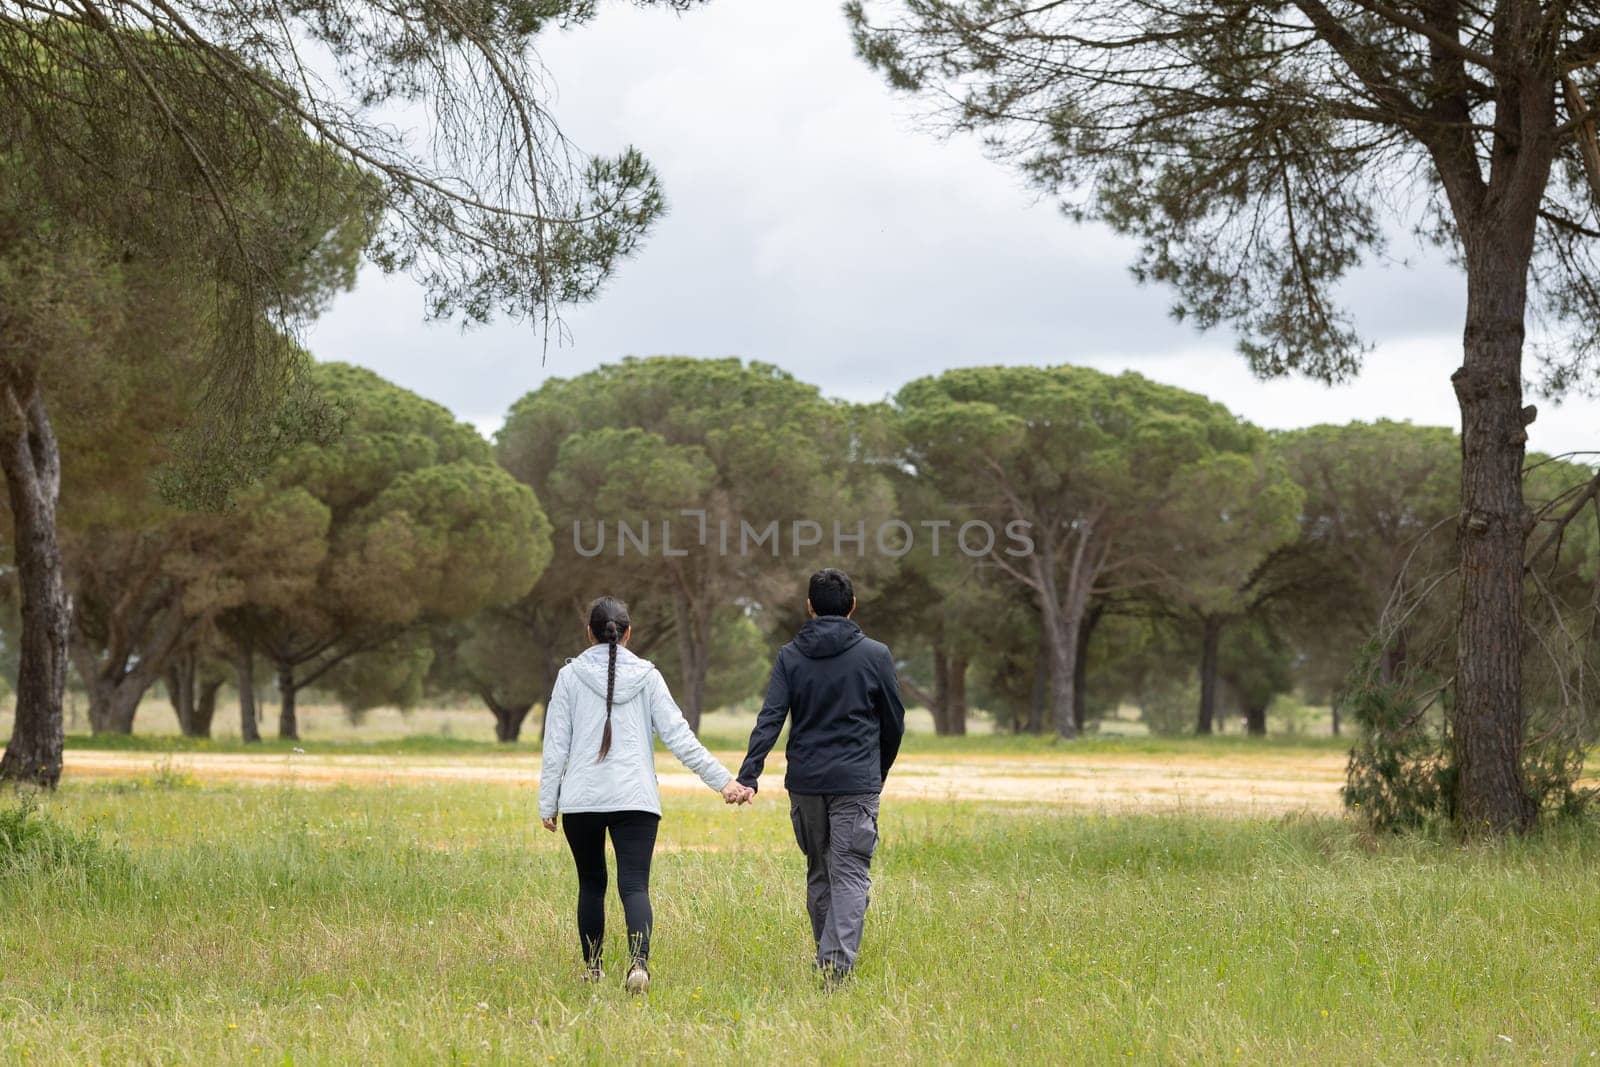 A couple is walking in a field with trees in the background. The man is wearing a black jacket and the woman is wearing a white jacket